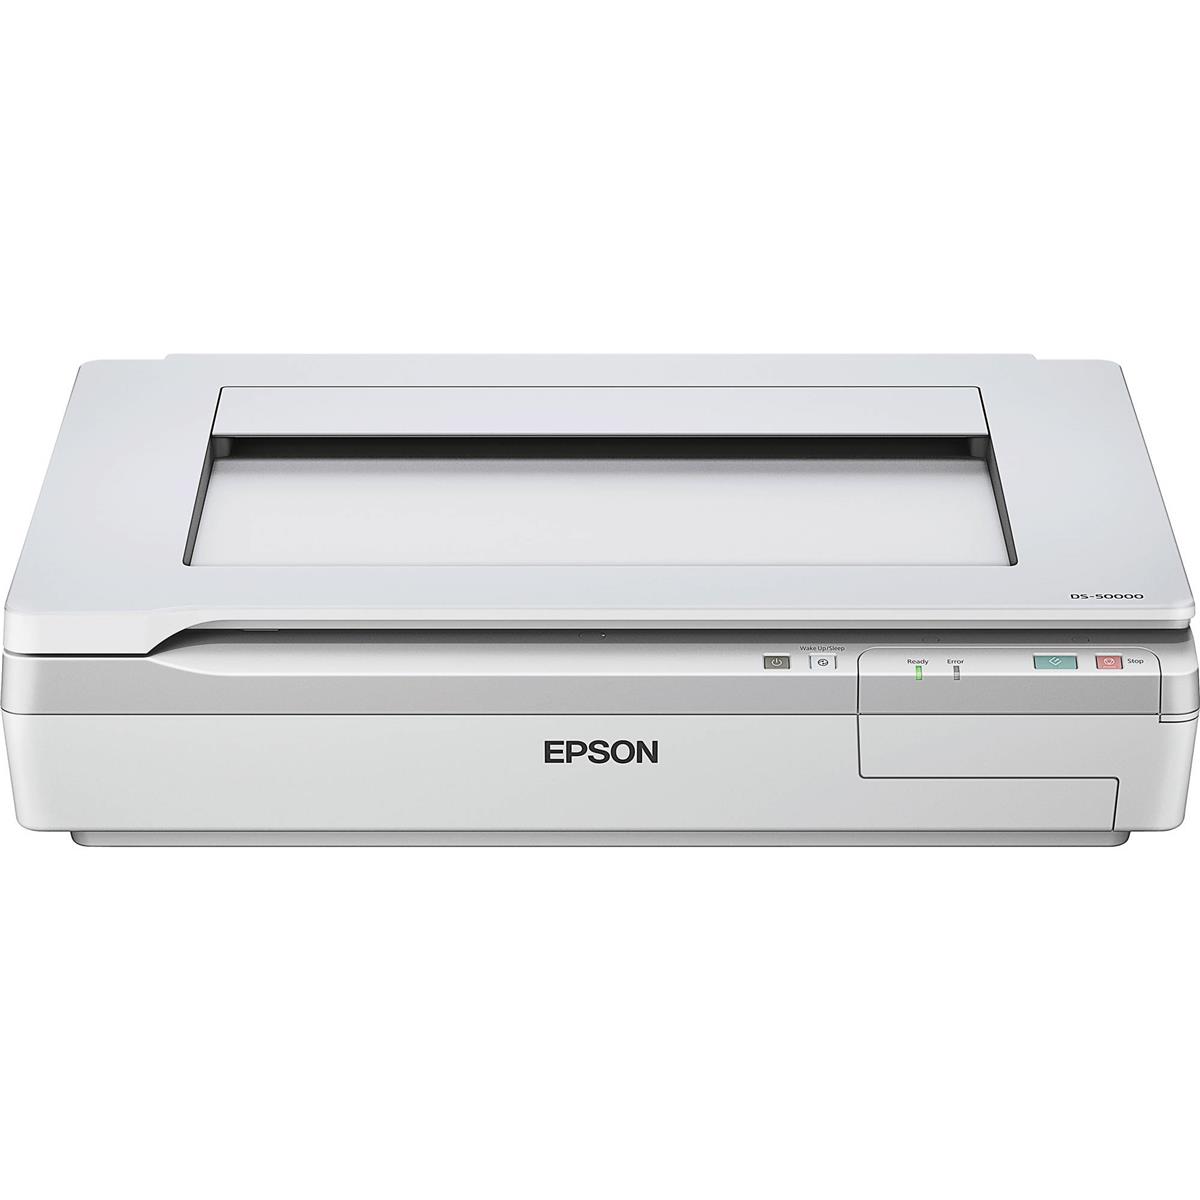 Image of Epson WorkForce DS-50000 Document Scanner